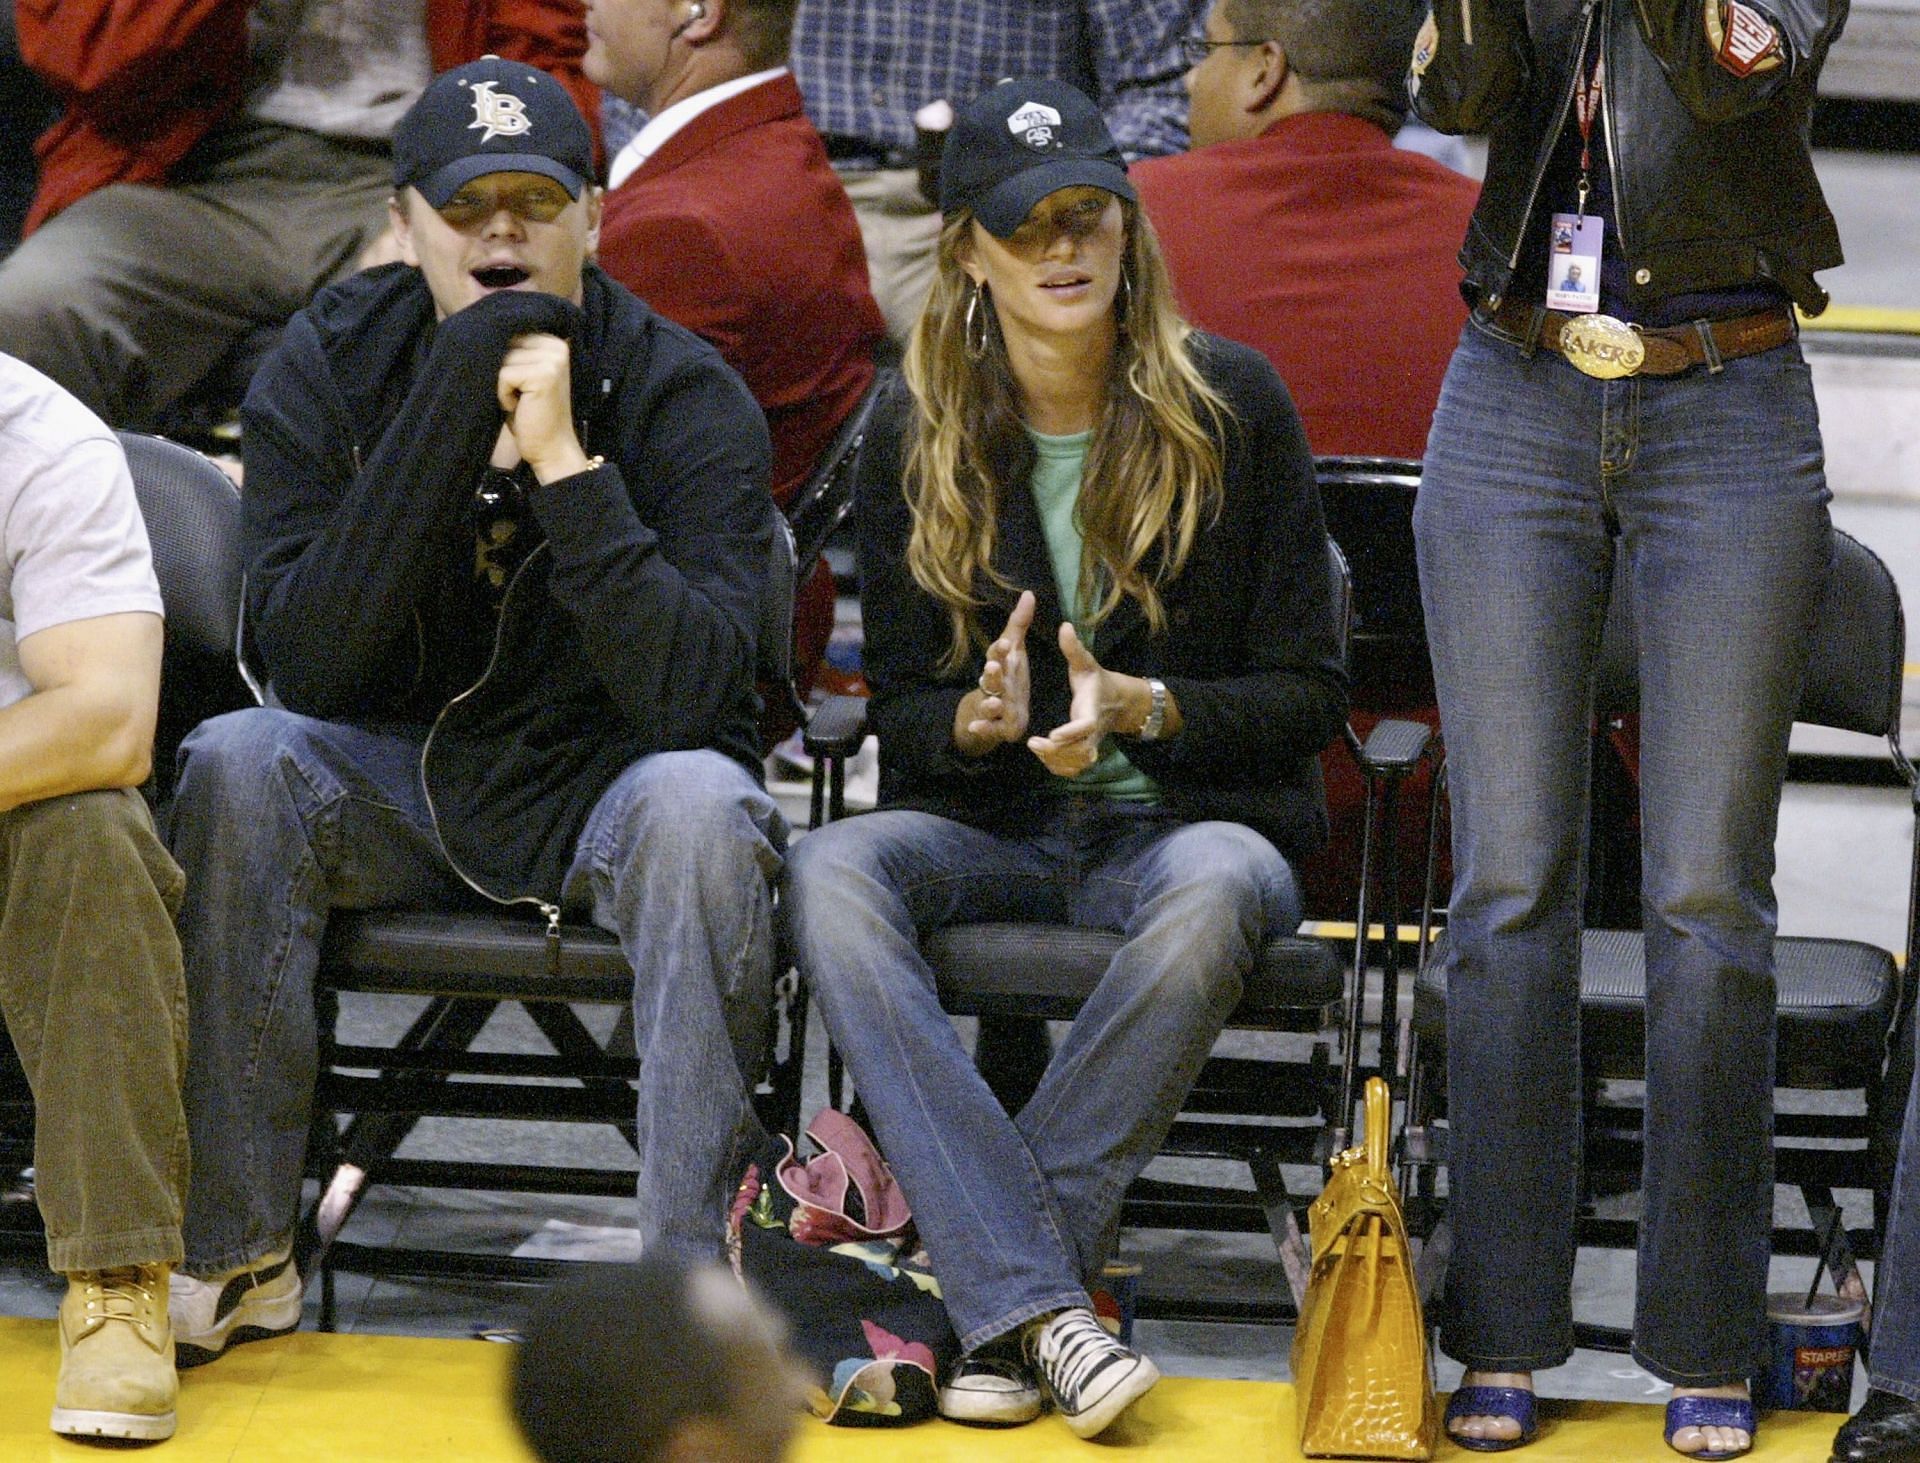 Gisele Bundchen and DiCaprio at the Celebs Attend Timberwolves vs. Lakers Game 4 Western Conference Finals game